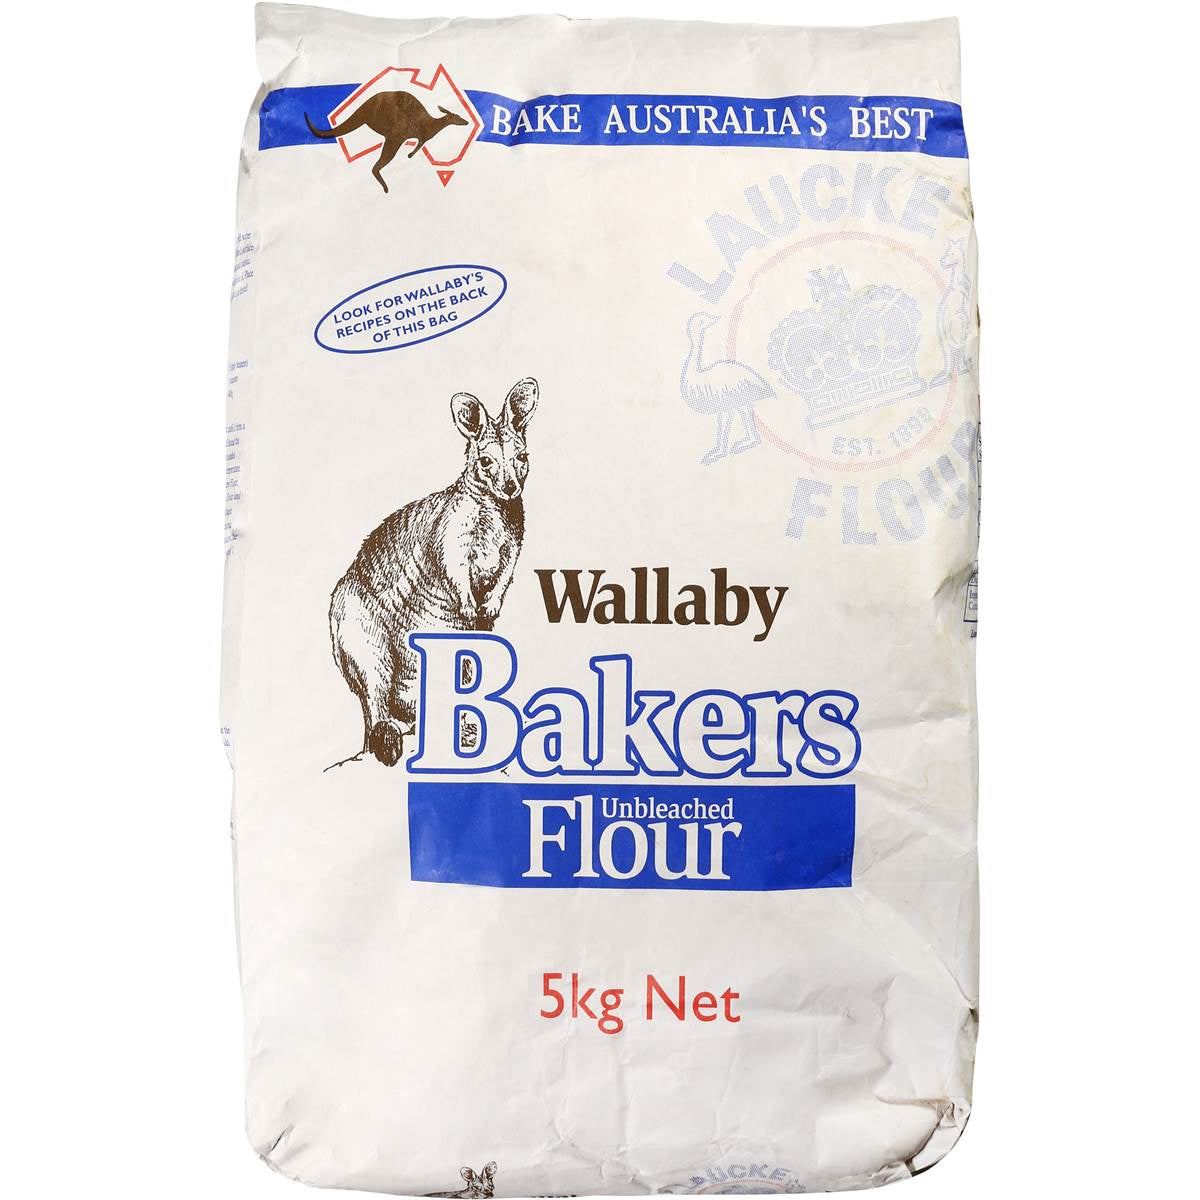 Wallaby Bakers Flour 5Kg